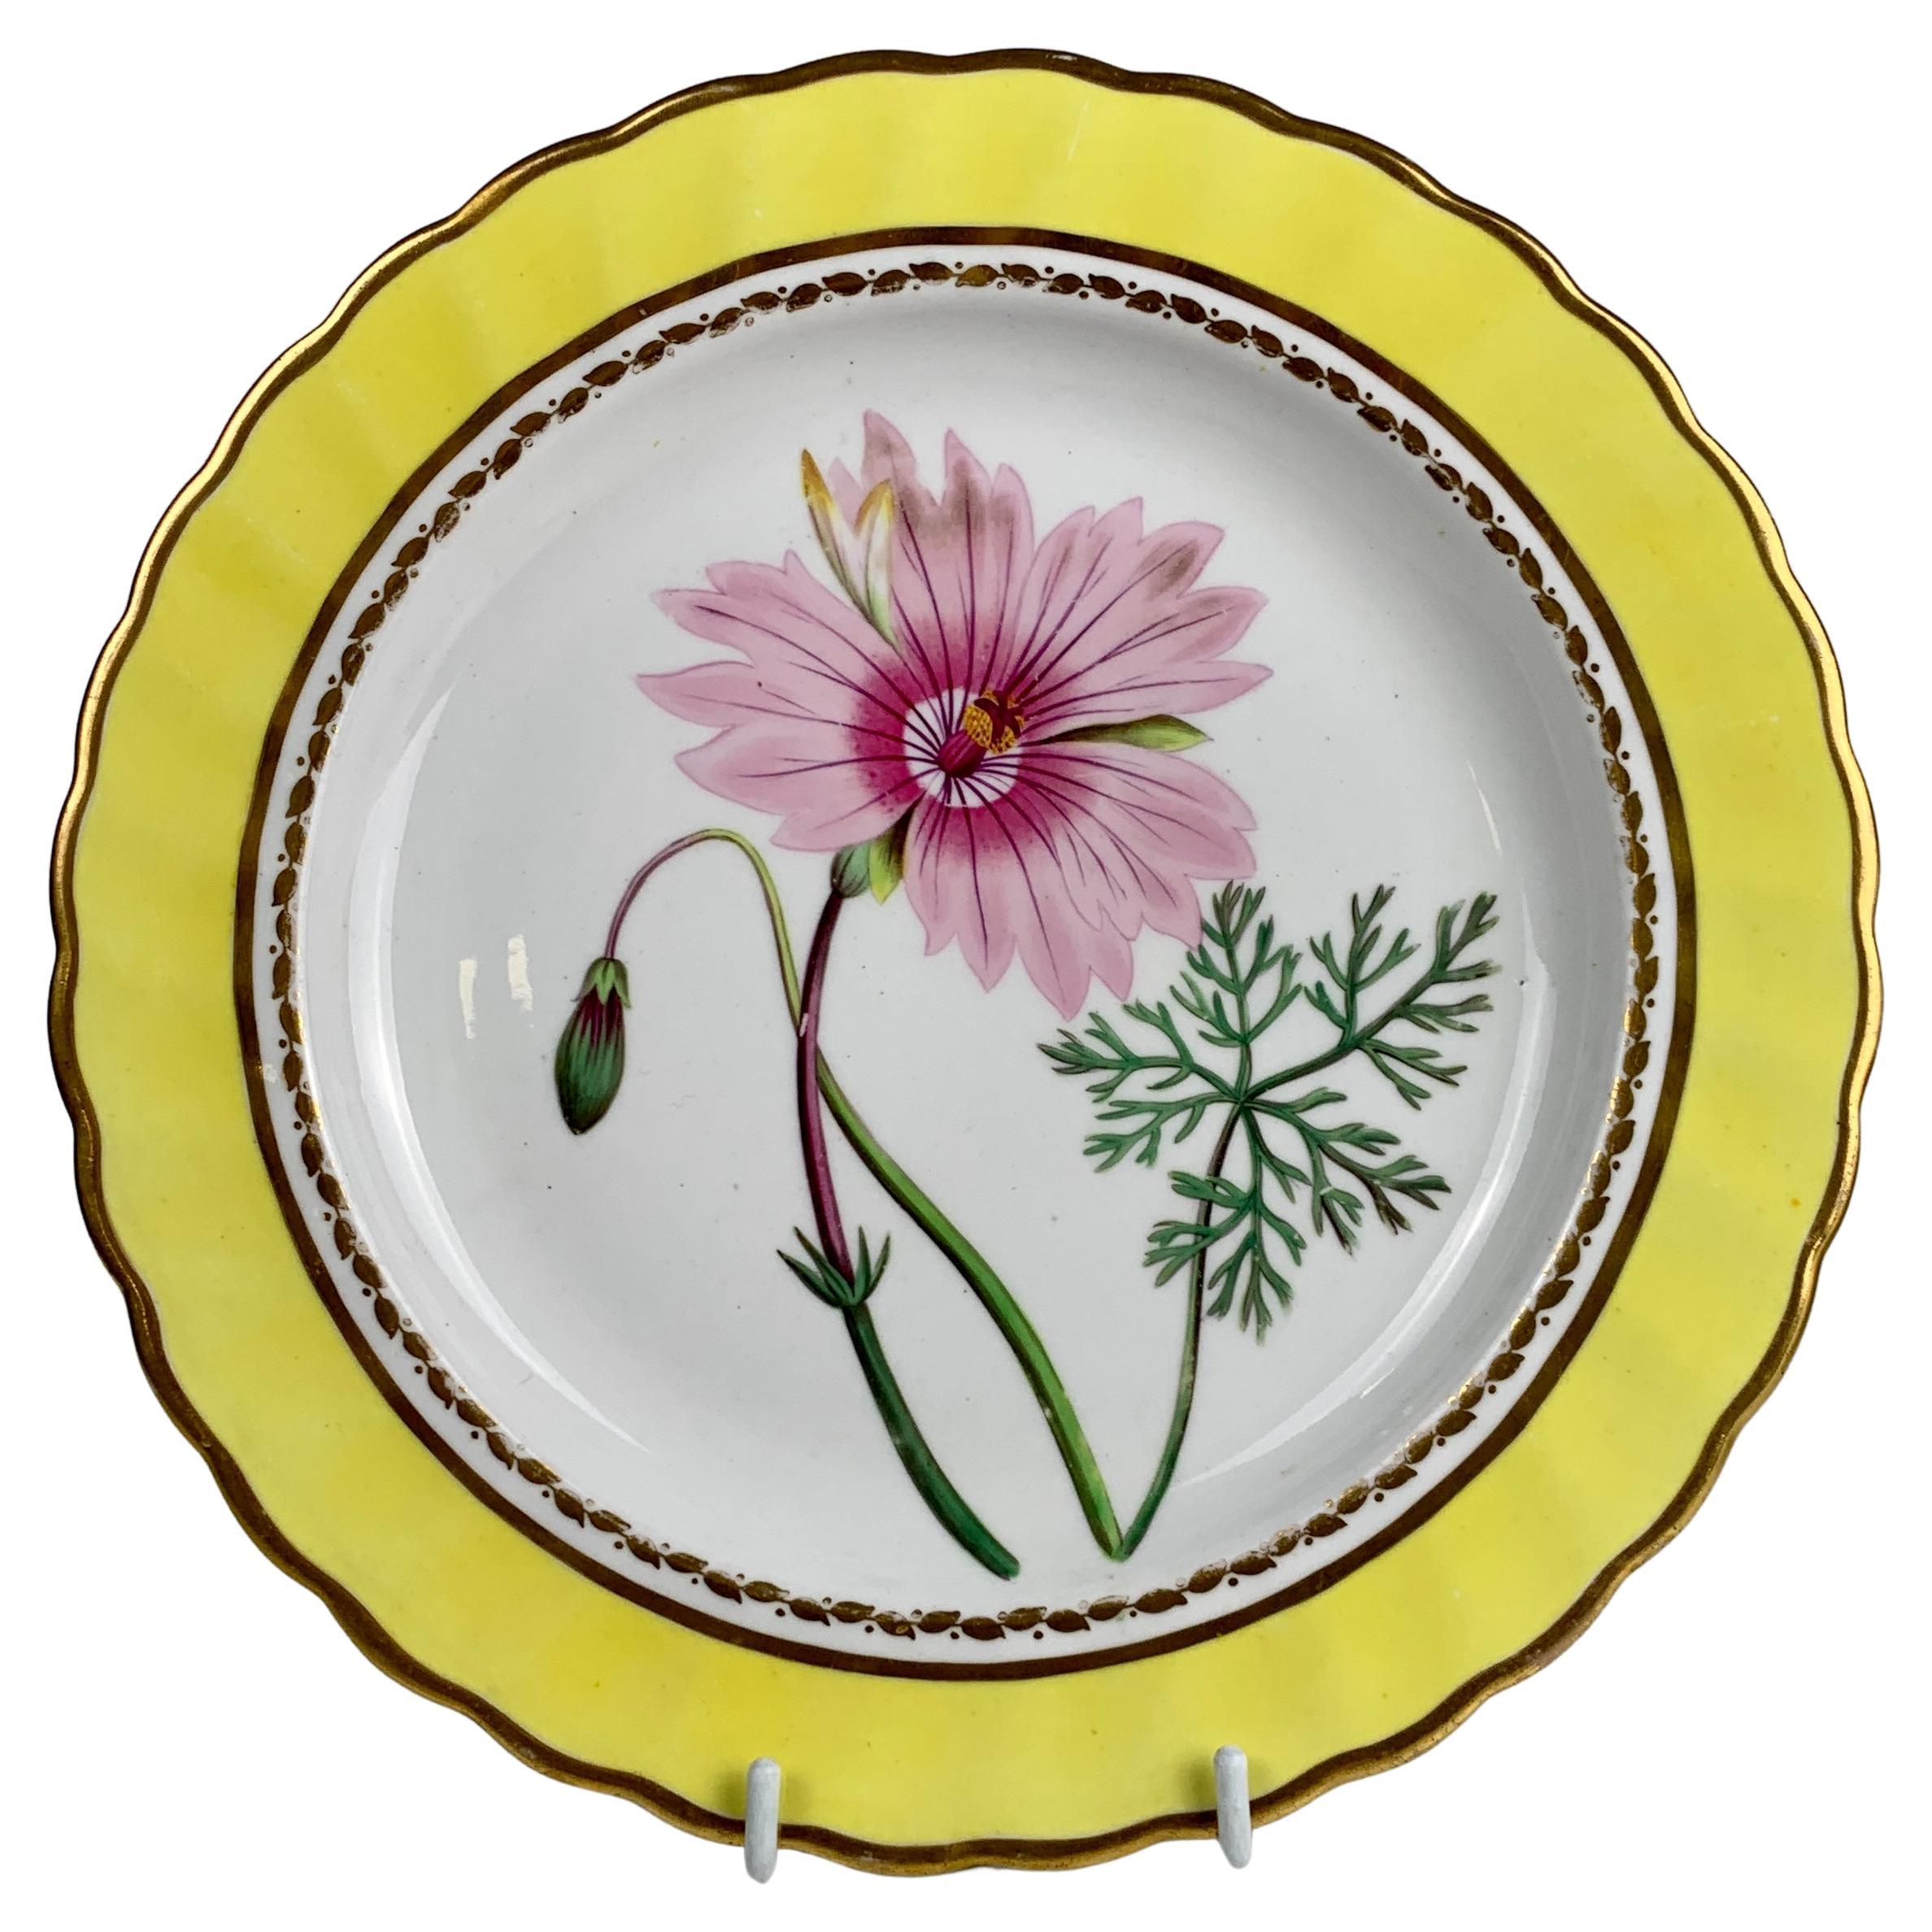 Hand Painted Botanical Porcelain Plate Made by Spode, Circa 1820